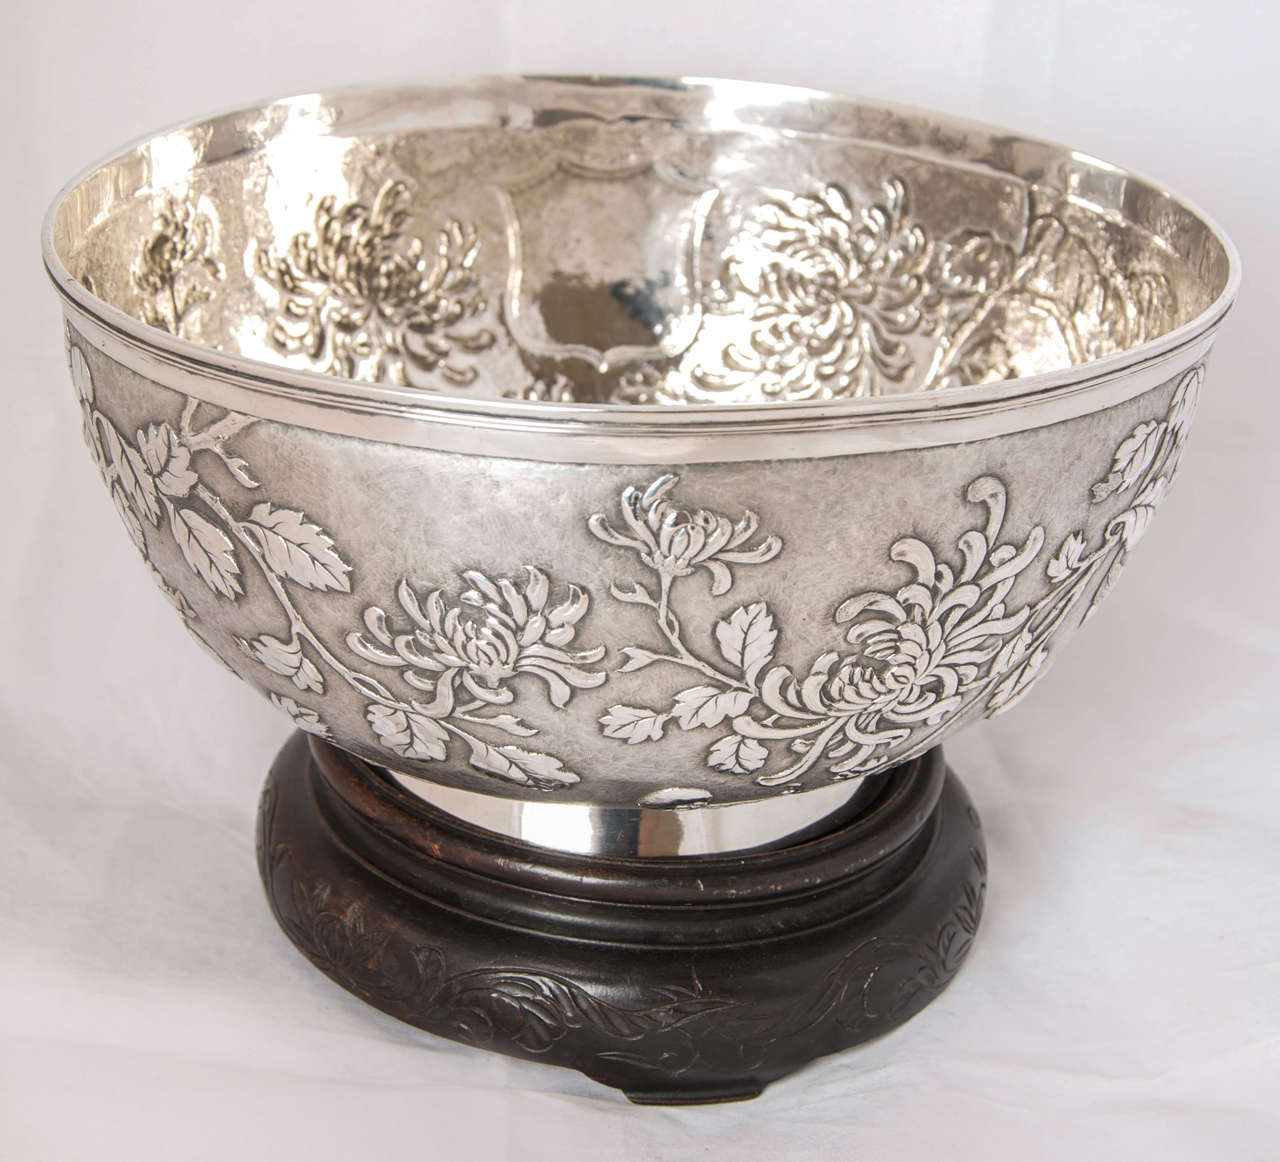 A large Chinese Export Silver Bowl with chrysanthemum decoration on a matte background. It was retailed by HC, for Hung Chong 